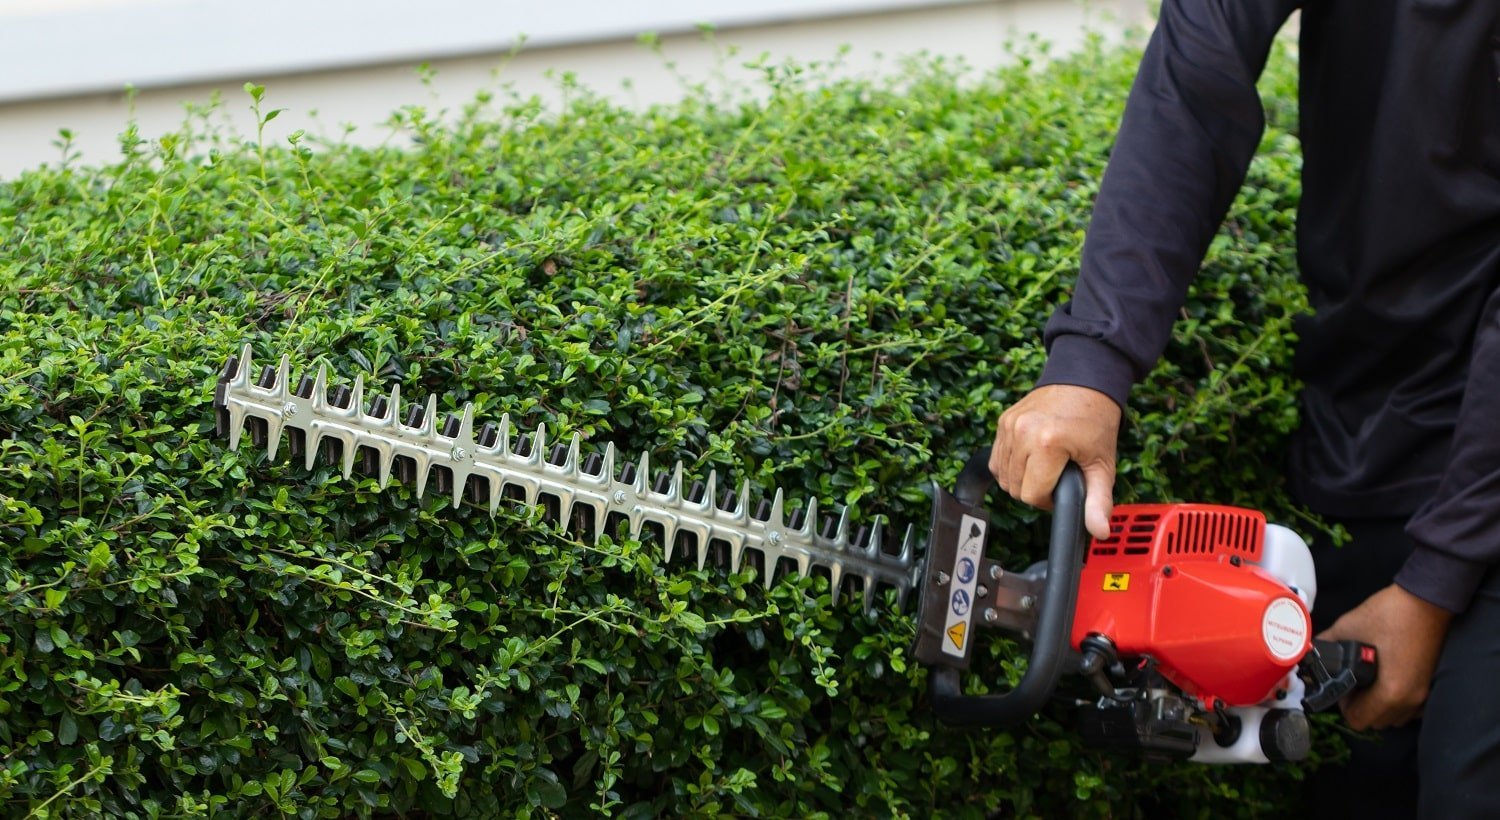 Home and garden concept. Hedge trimmer in action. Bush trimming work. Shrubs pruning. Gardening and cutting activities.